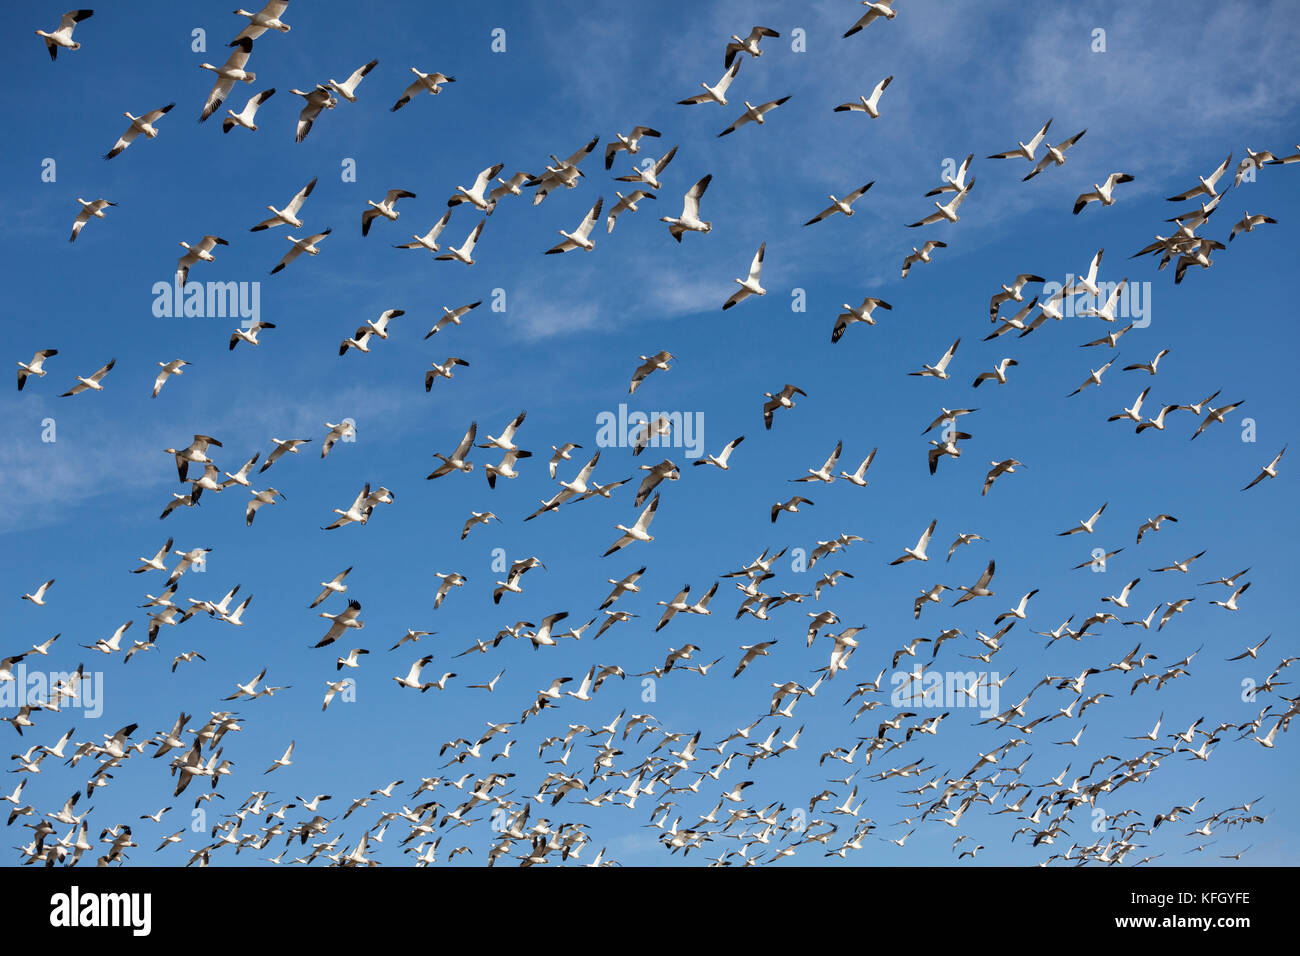 WA14237-00...WASHINGTON - Snow geese in flight over the Skaget Valley. Stock Photo